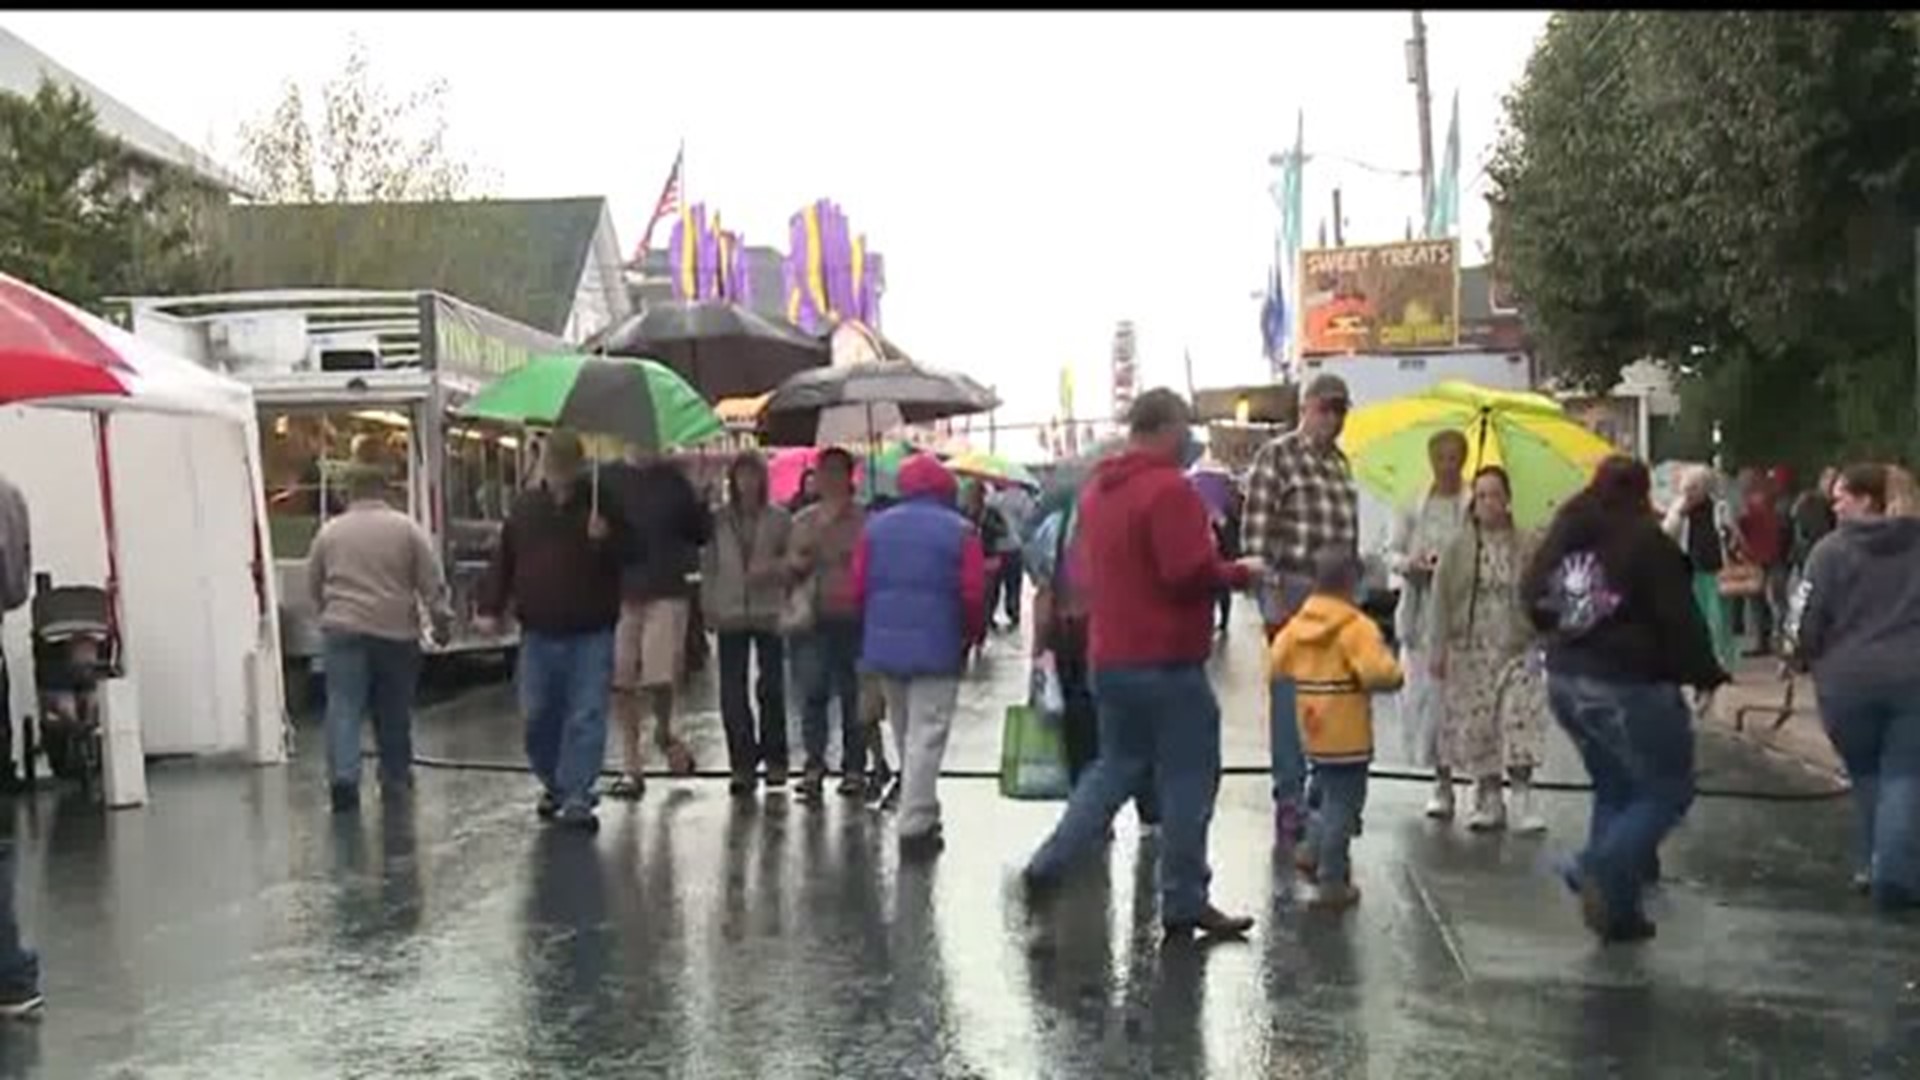 People attend New Holland fair despite weather